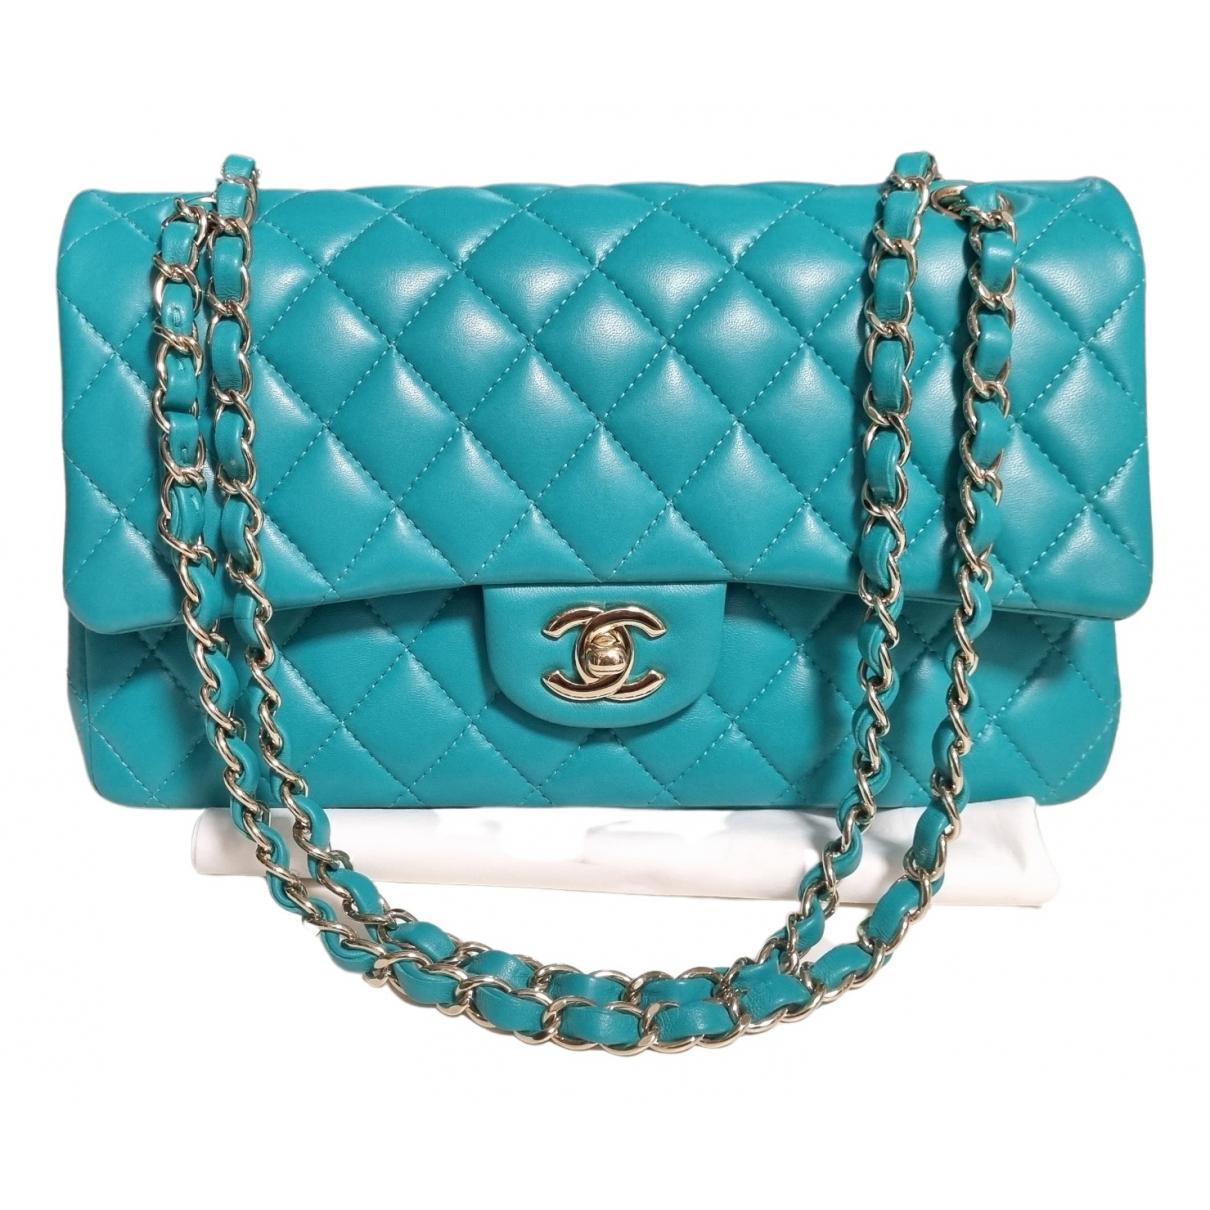 Timeless/classique leather crossbody bag Chanel Turquoise in Leather -  24130300